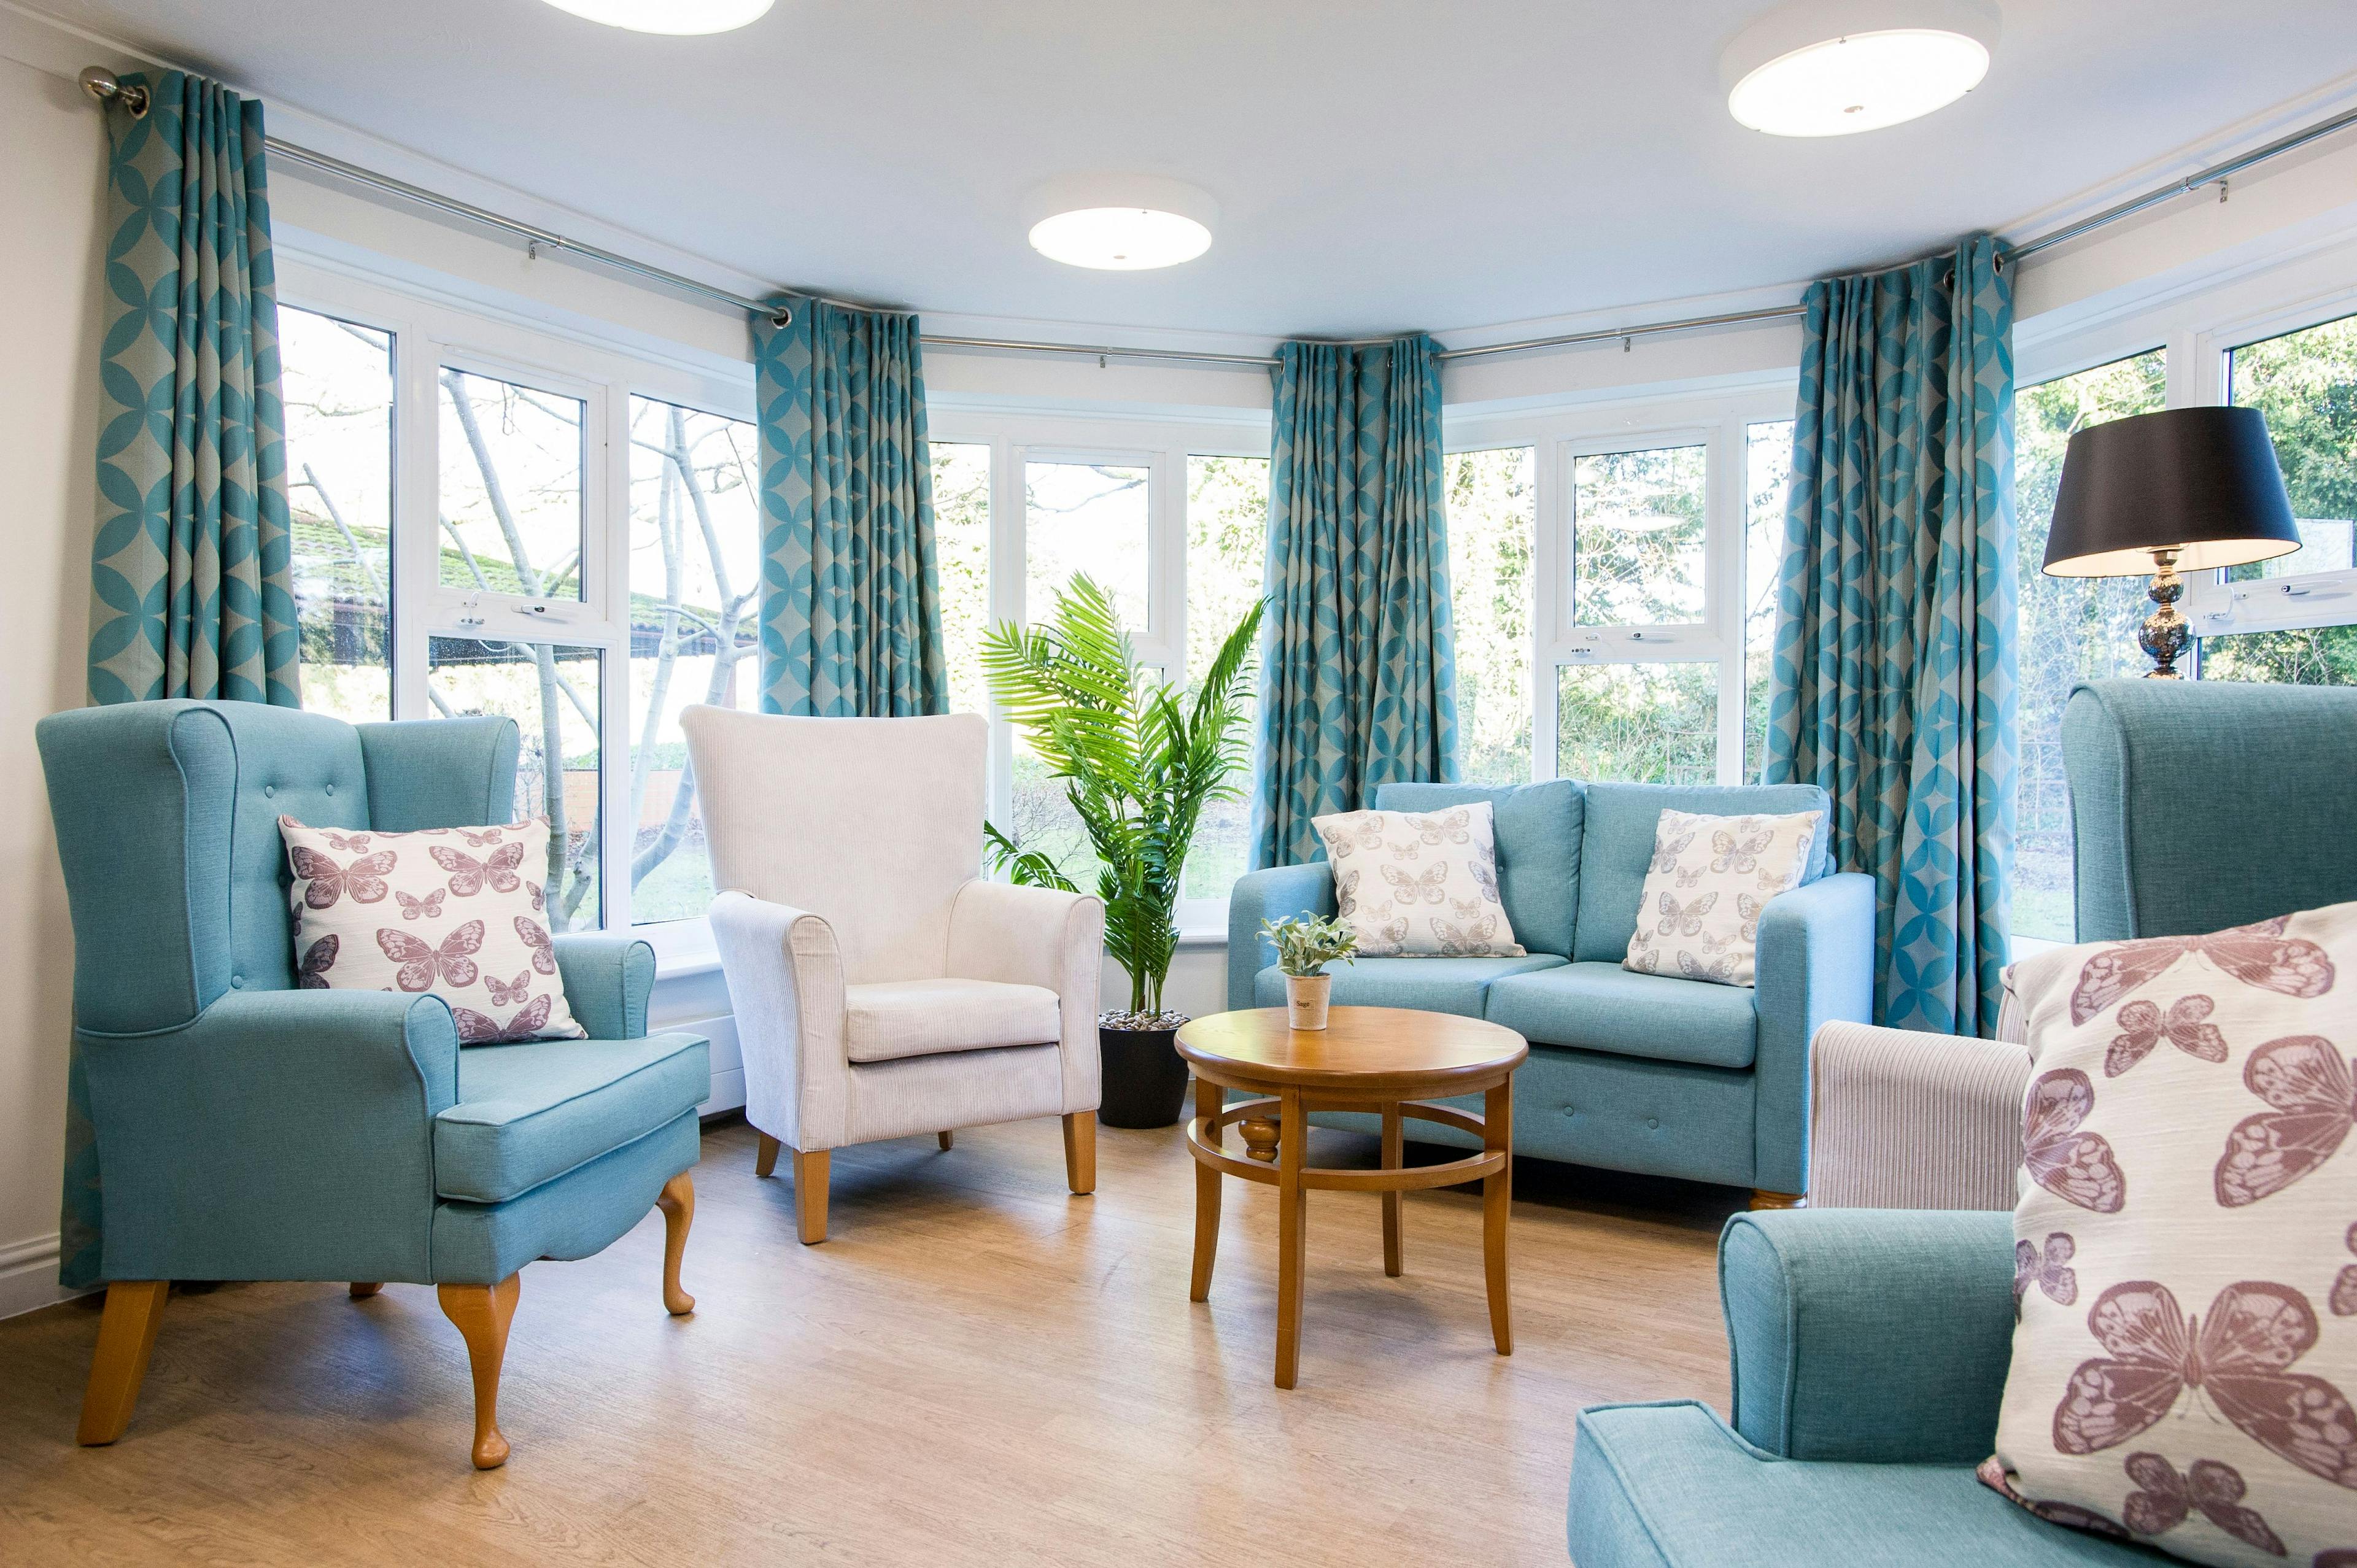 Communal Lounge at Basingfield Court Care Home in Basingstoke, Hampshire